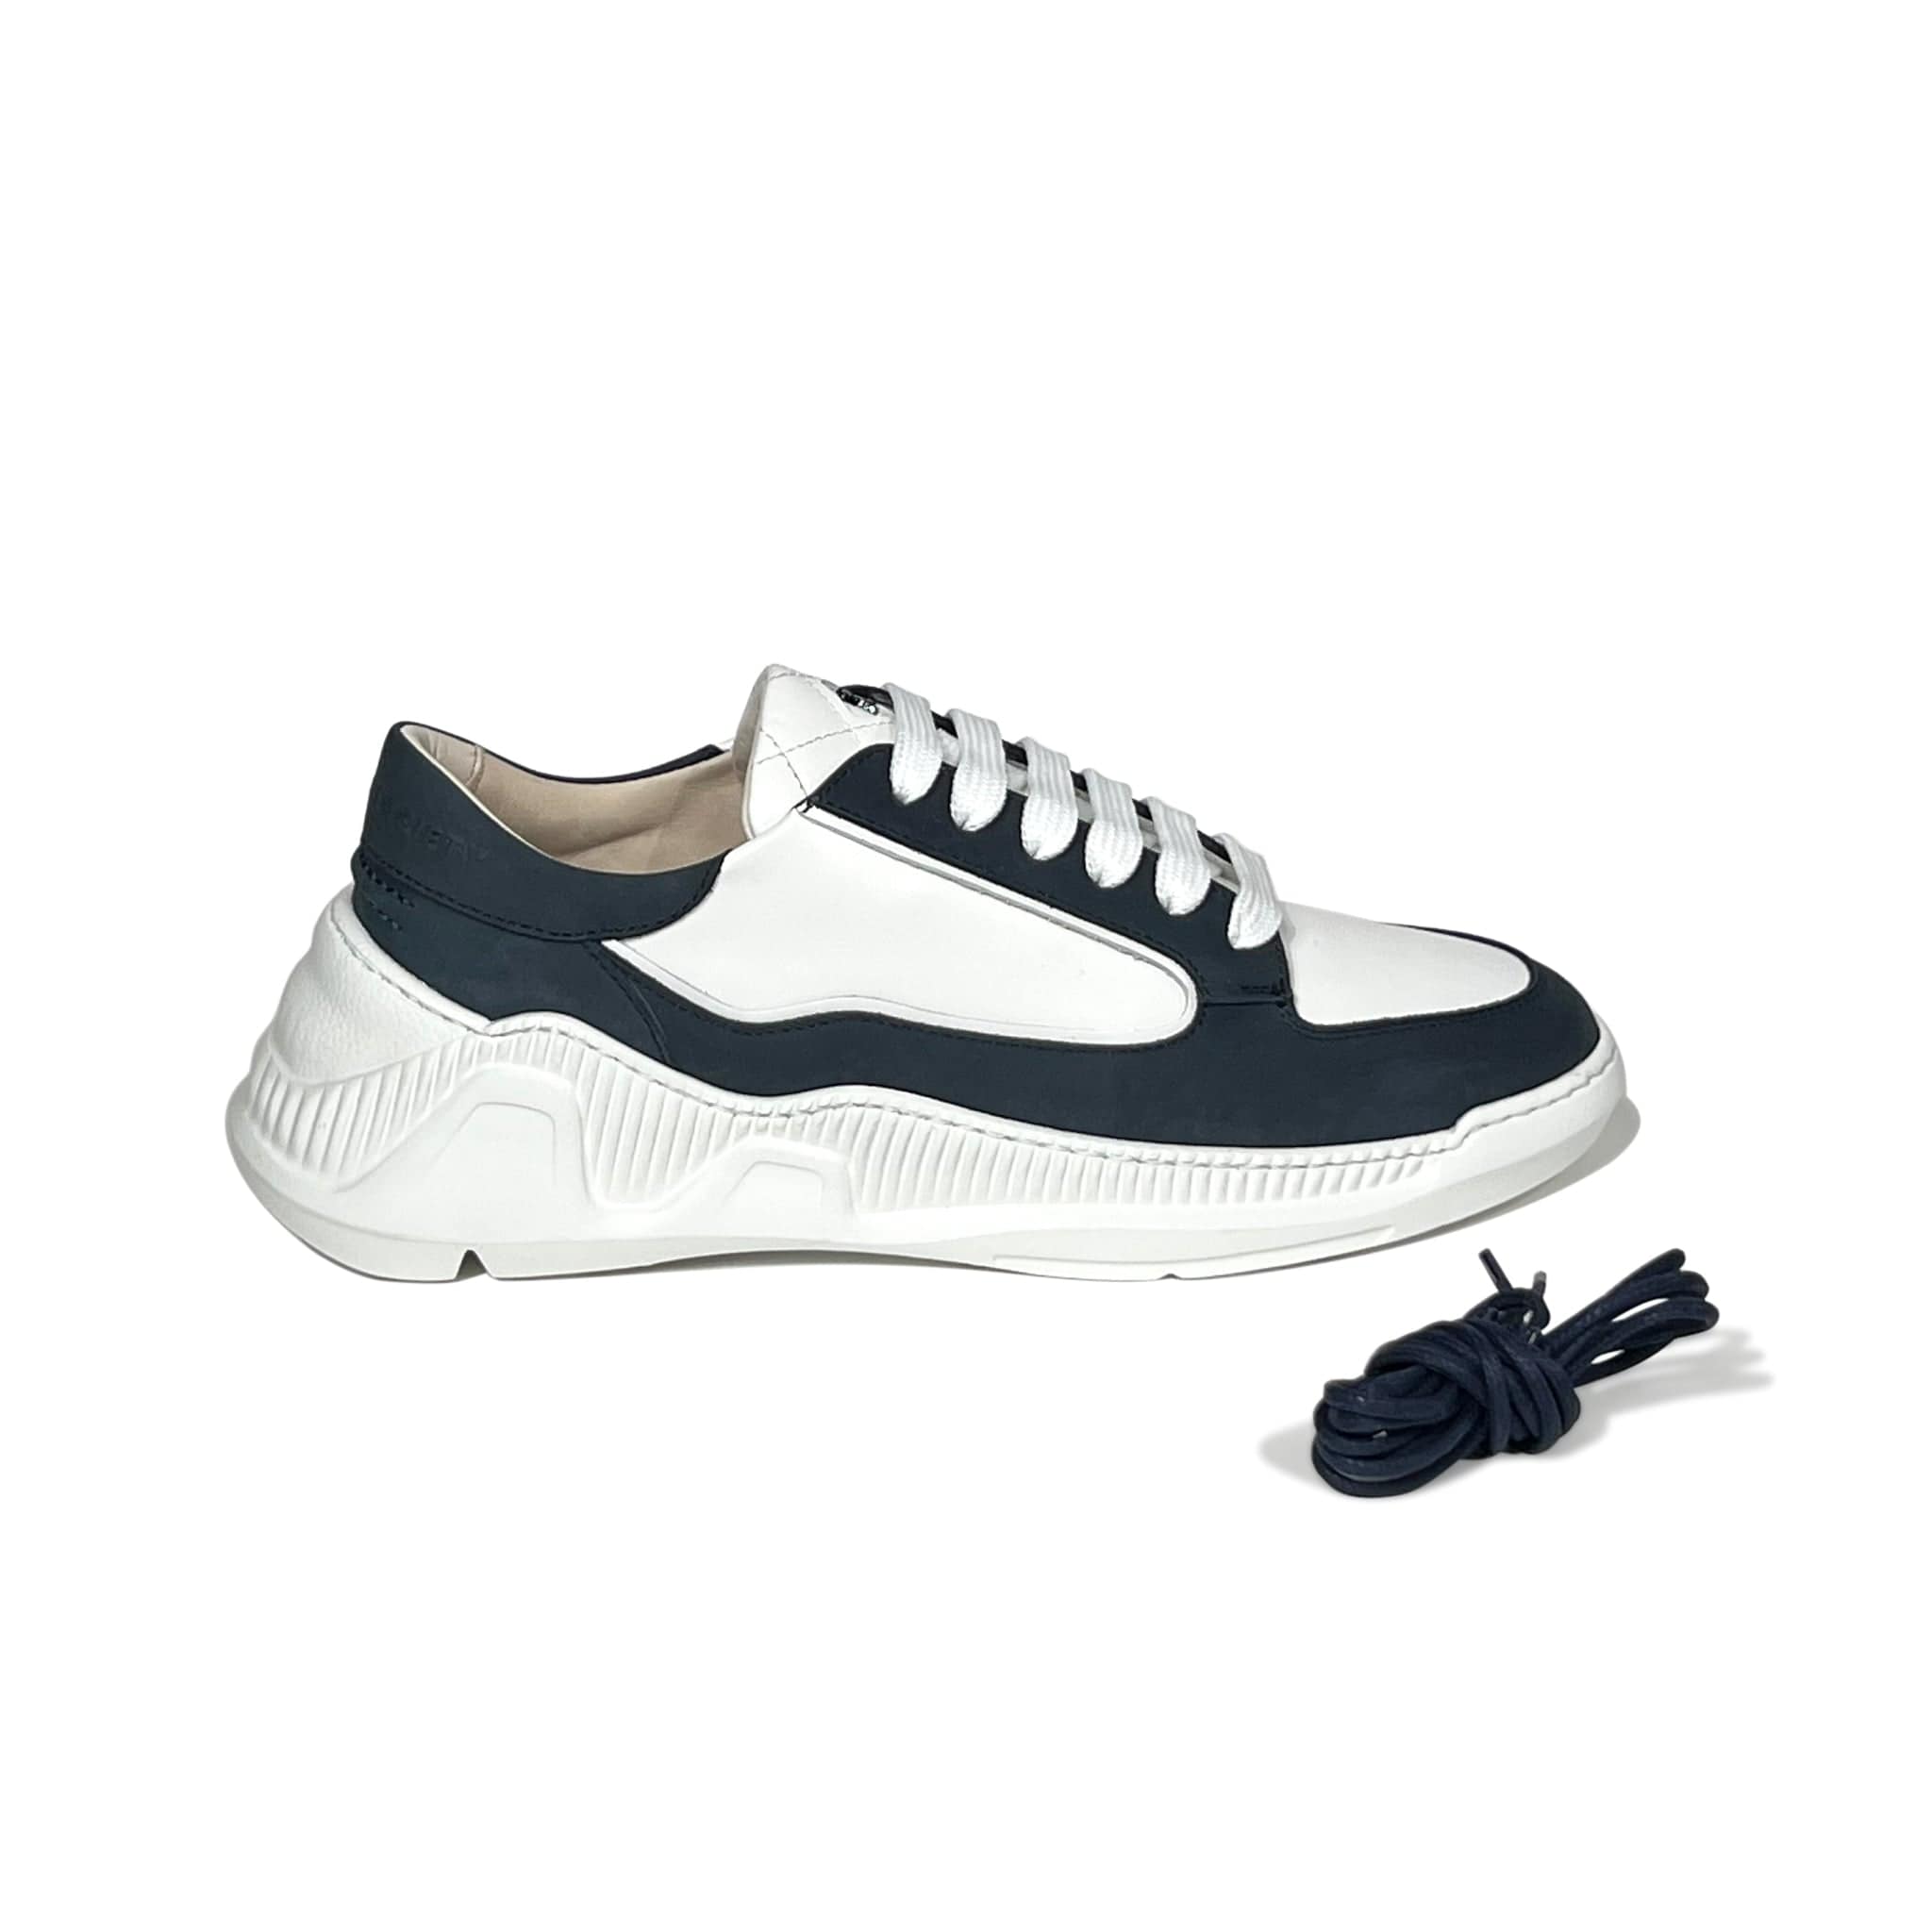 Nesto Low Top Italian Leather Sneaker | Navy and White | Made in Italy | Size 40